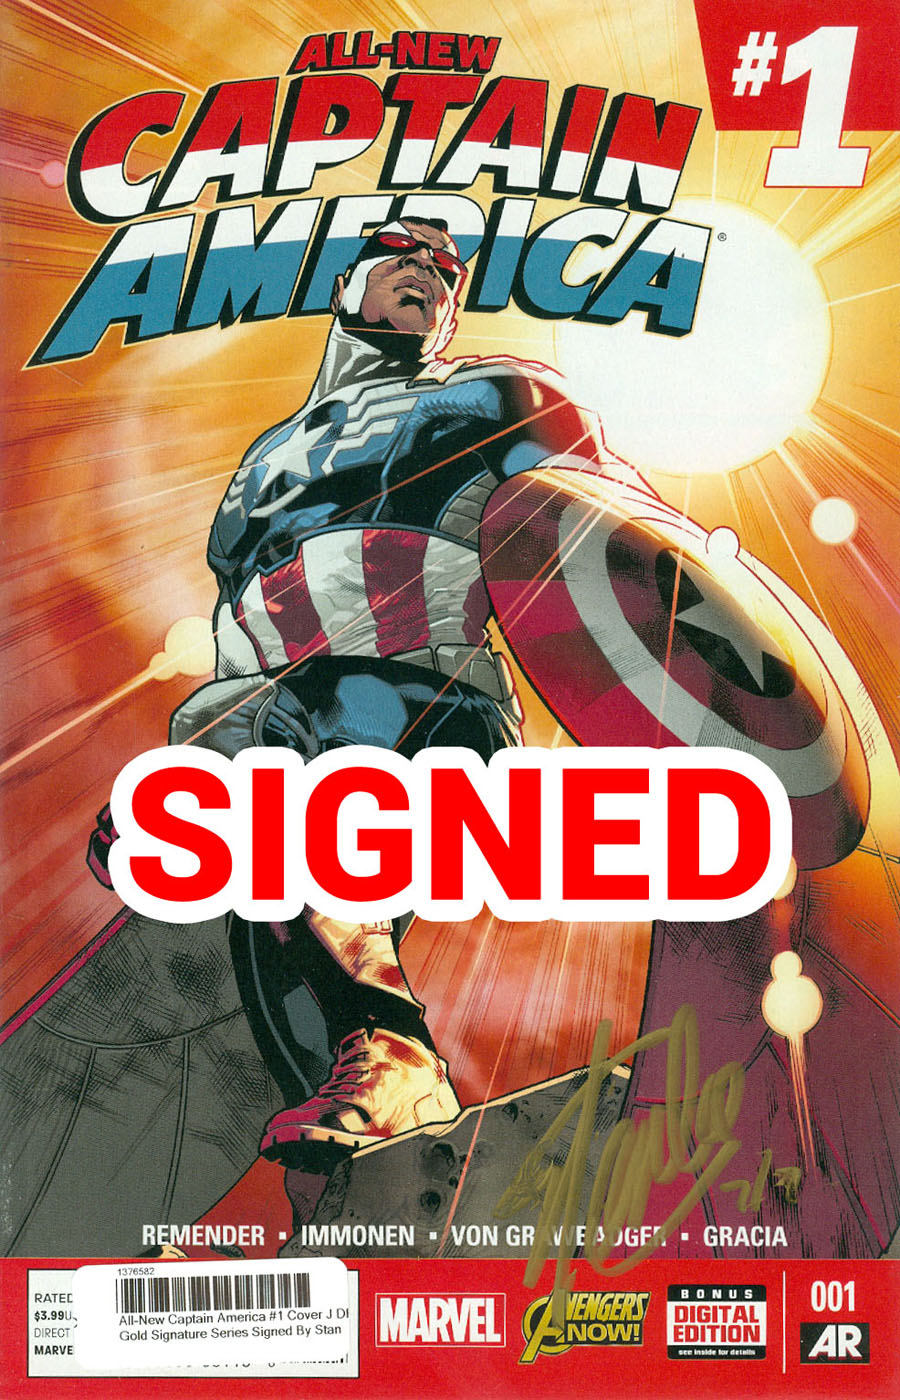 All-New Captain America #1 Cover J DF Gold Signature Series Signed By Stan Lee